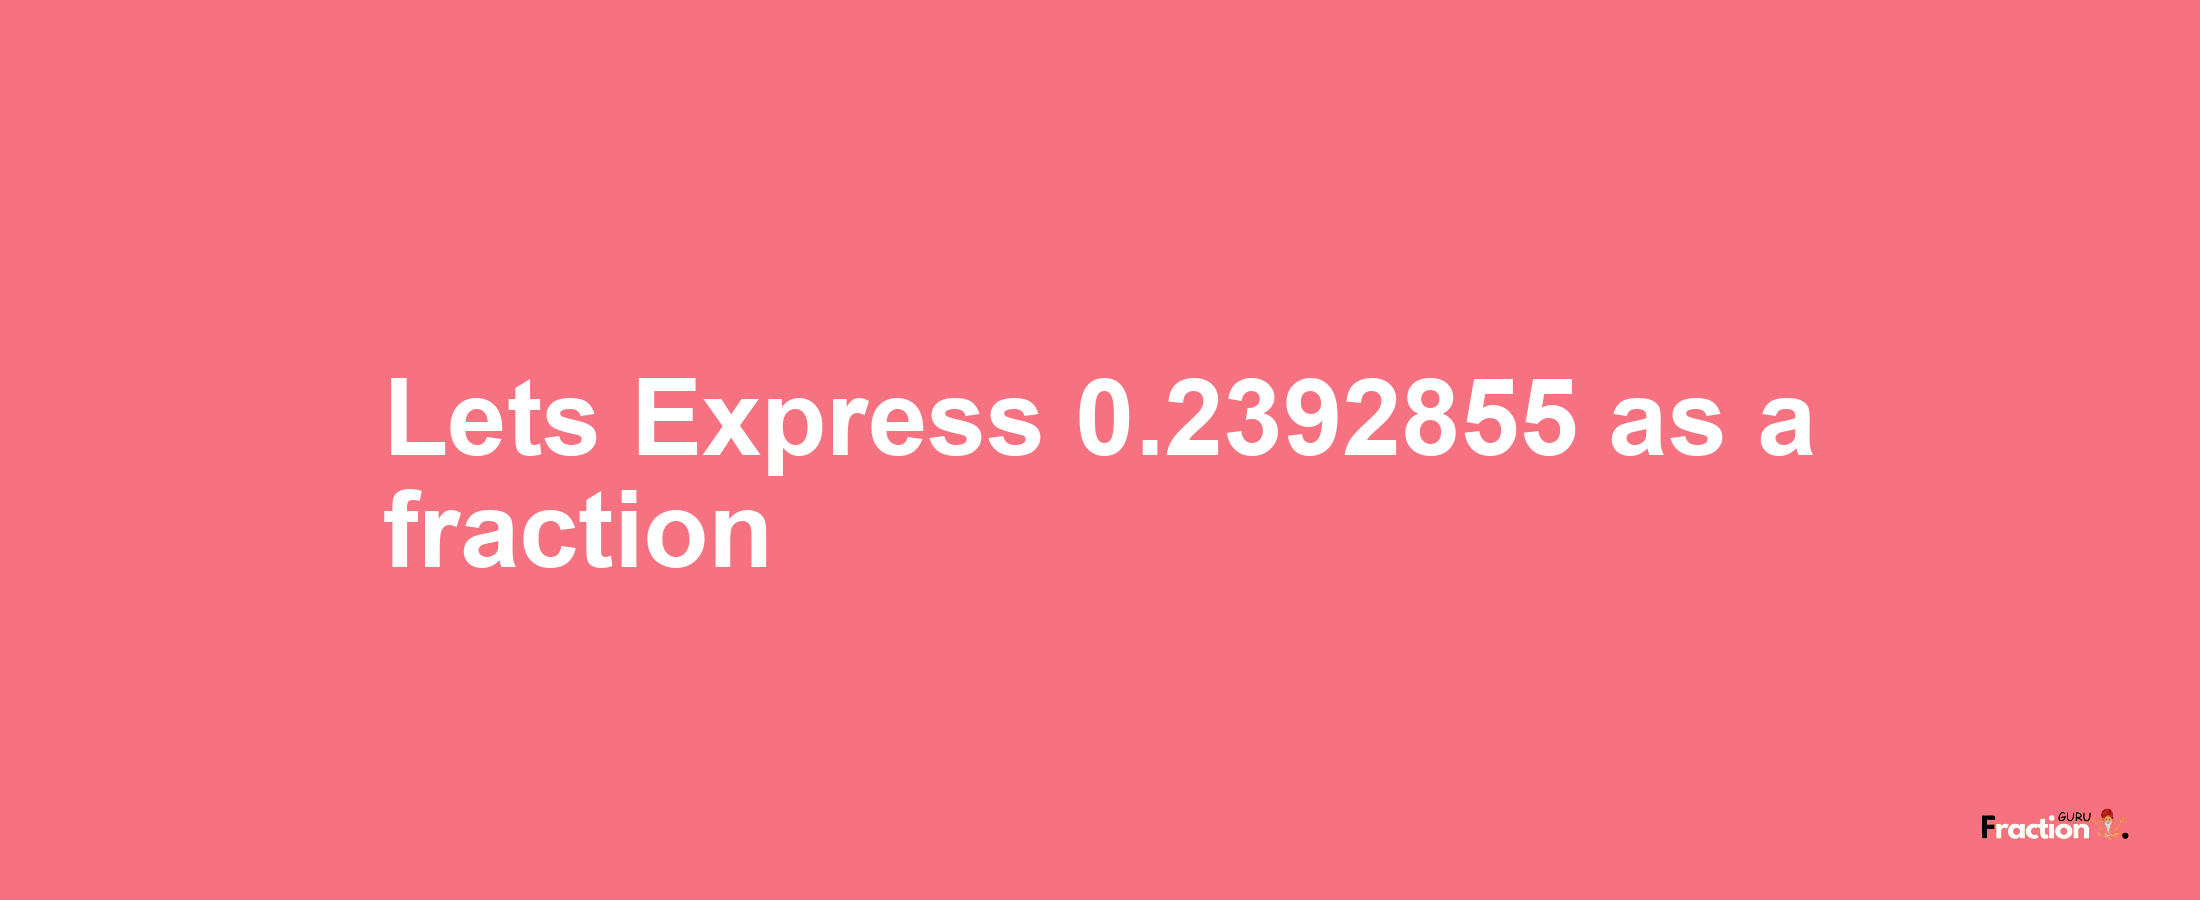 Lets Express 0.2392855 as afraction